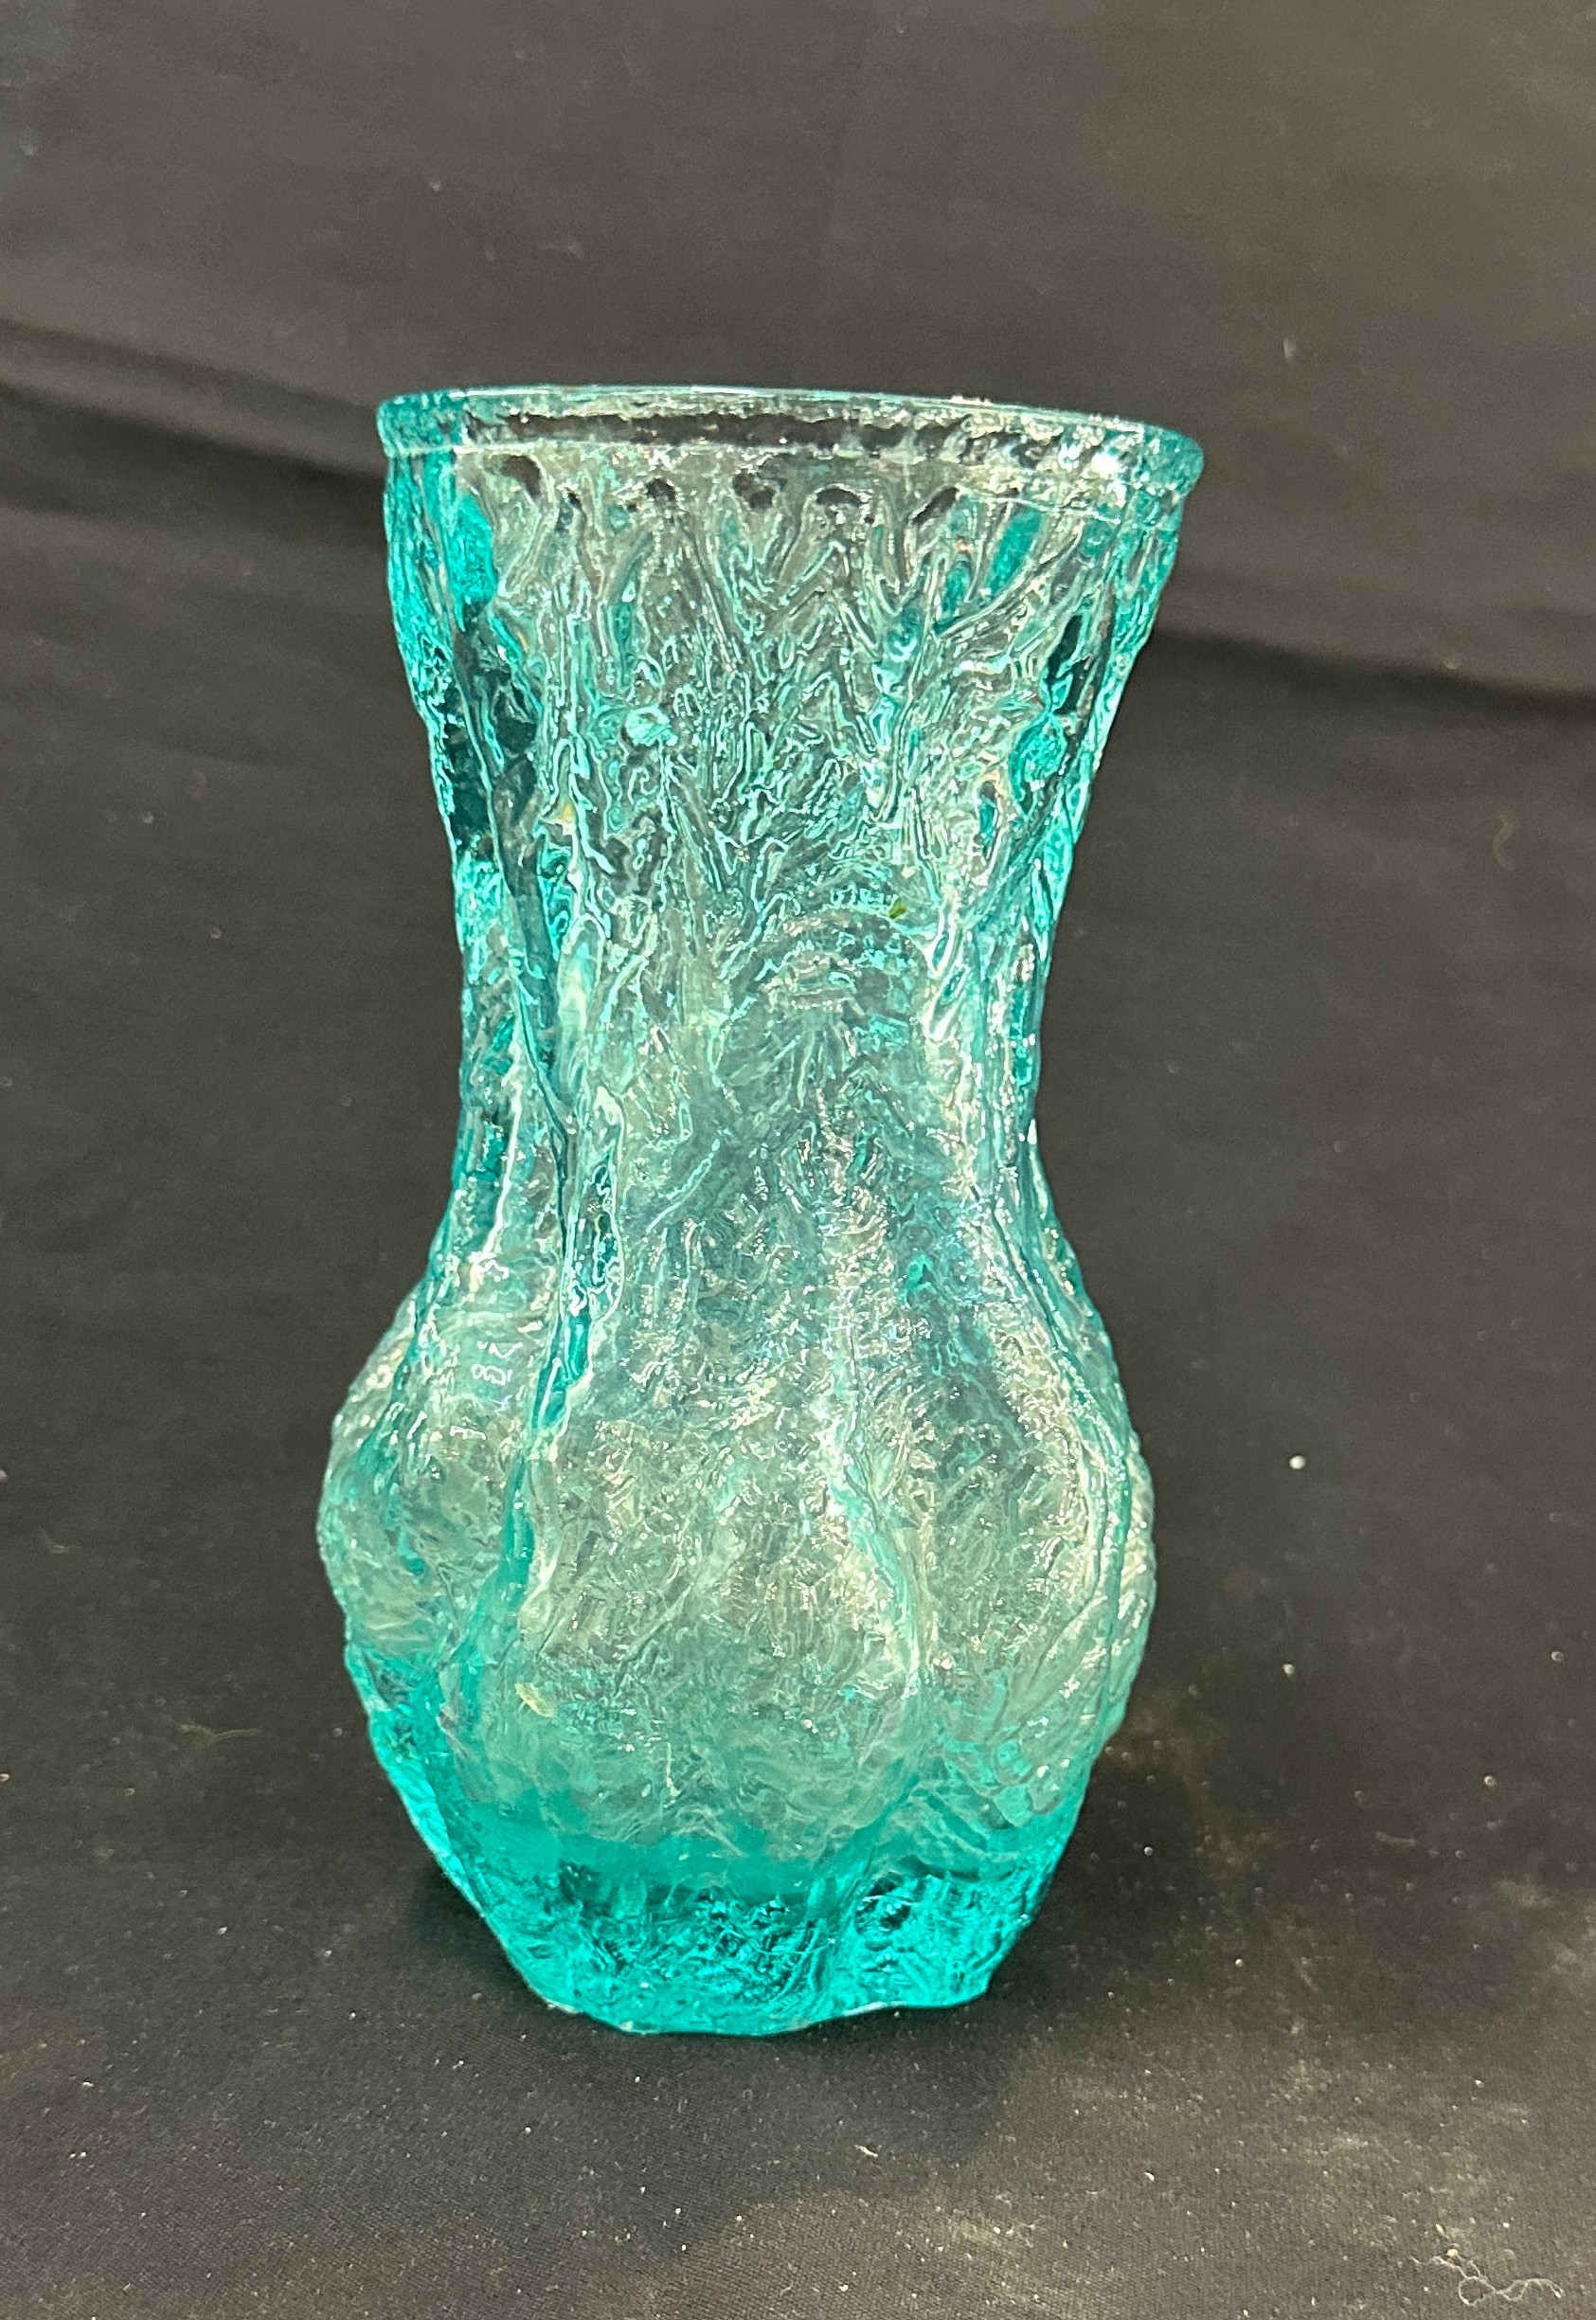 Decorative glass vase, possibly Whitefriars, overall height 8 inches - Image 2 of 5